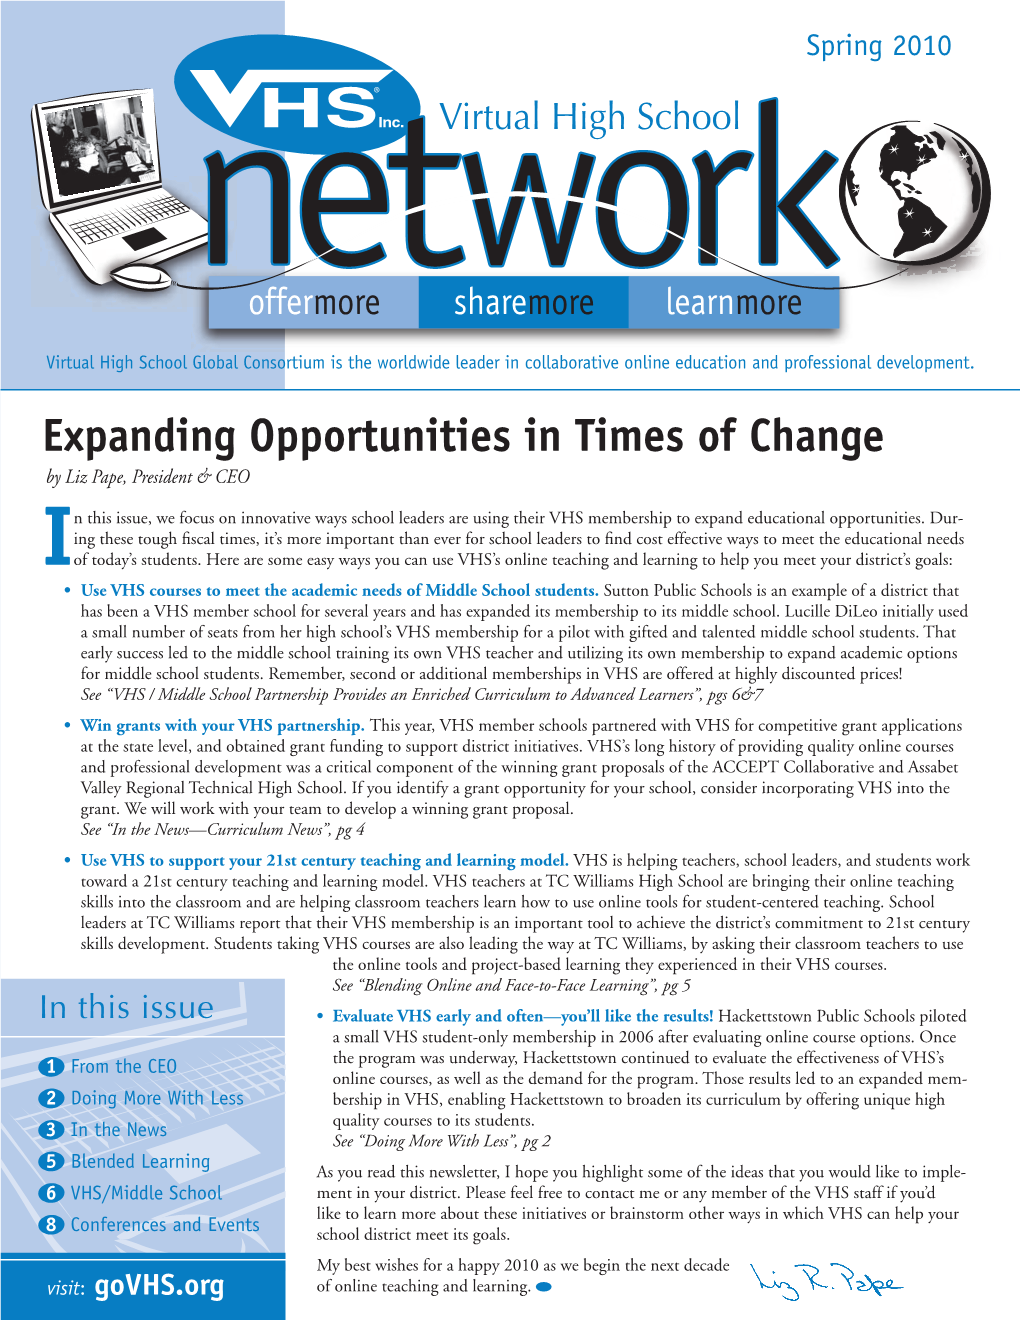 Expanding Opportunities in Times of Change by Liz Pape, President & CEO